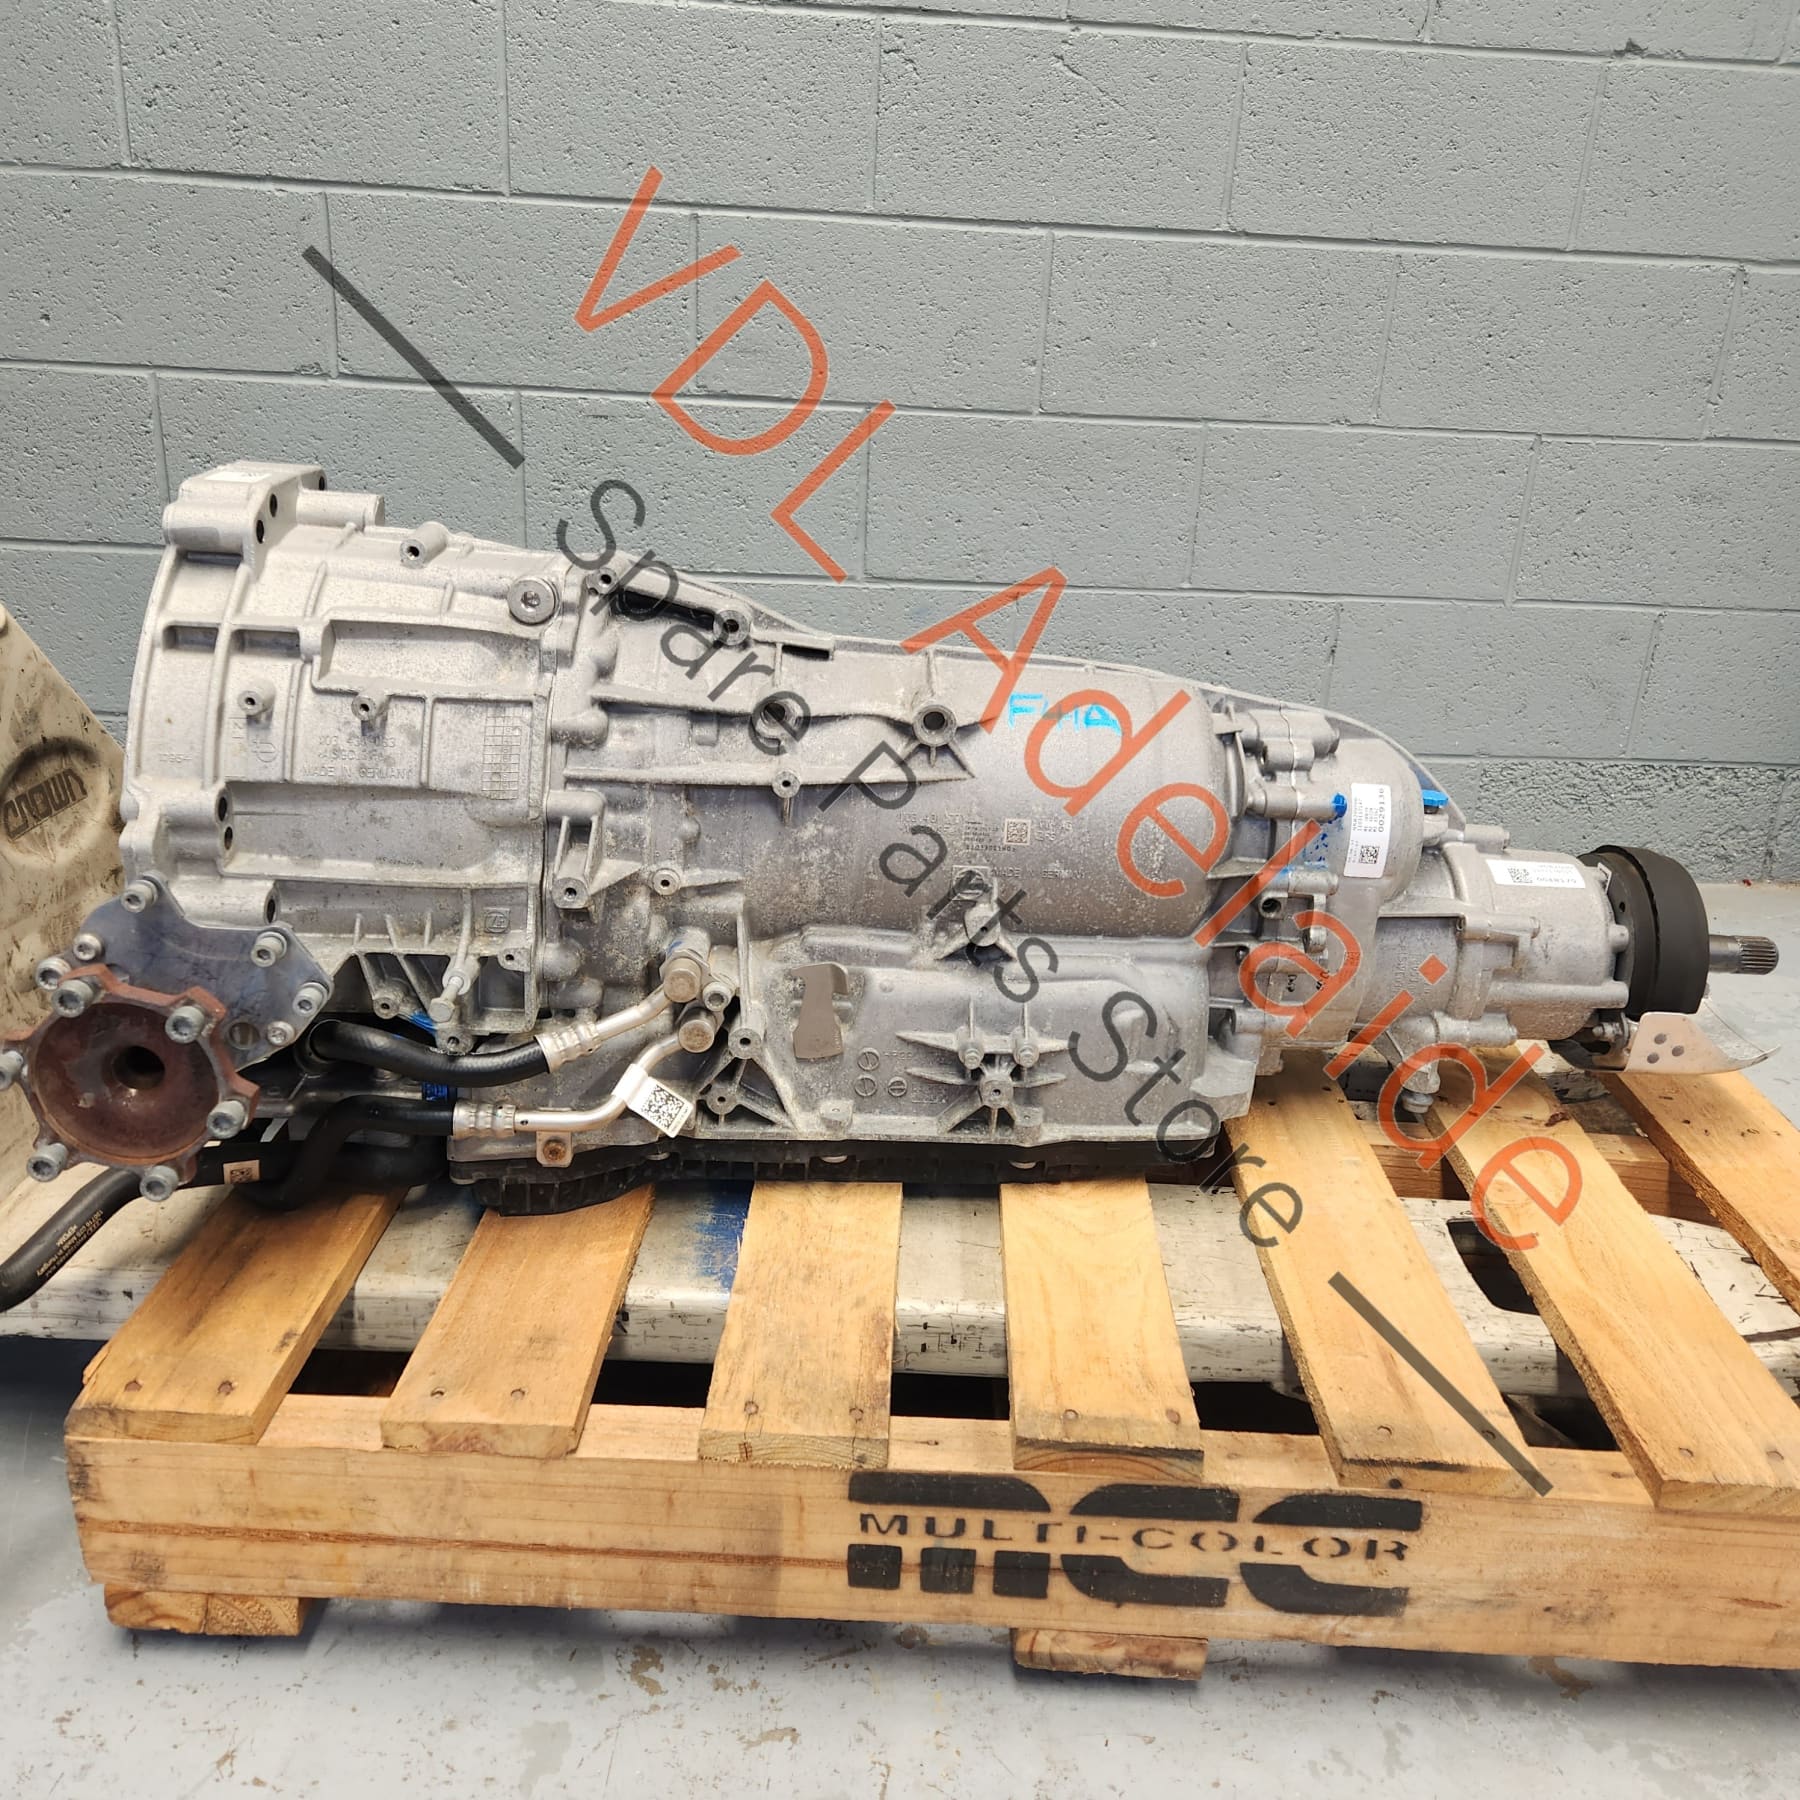 0D5300040001 0D5300040  Audi S4 S5 B9 8 Speed Transmission Gearbox SHP Only 34xxxkm 0D5300040 001